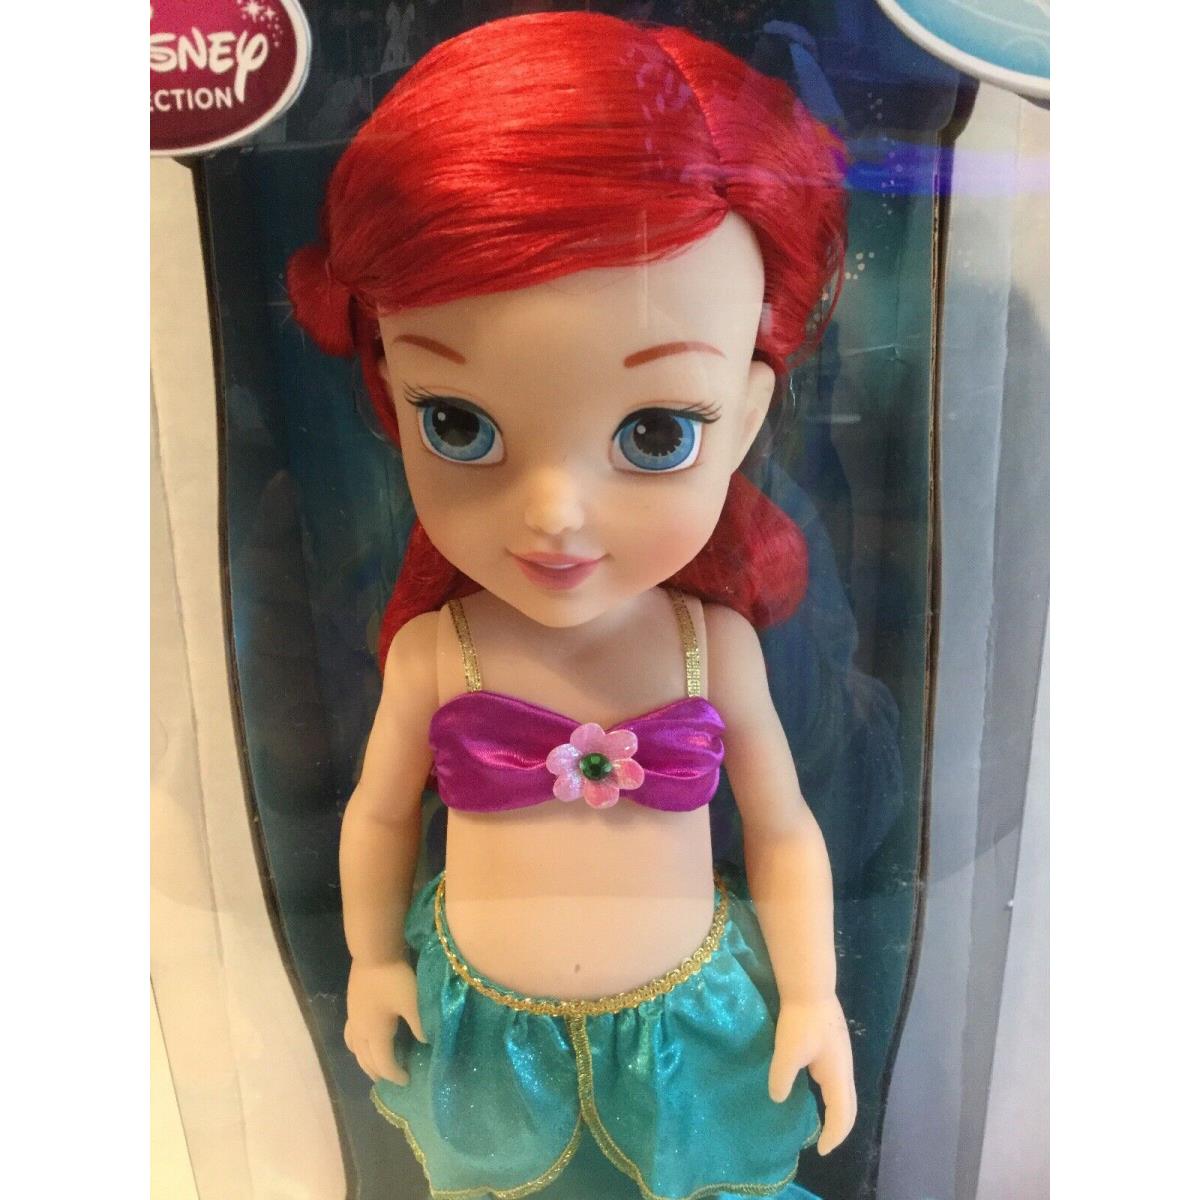 Disney Princess Arieltoddler Doll Collection From Disney Store New